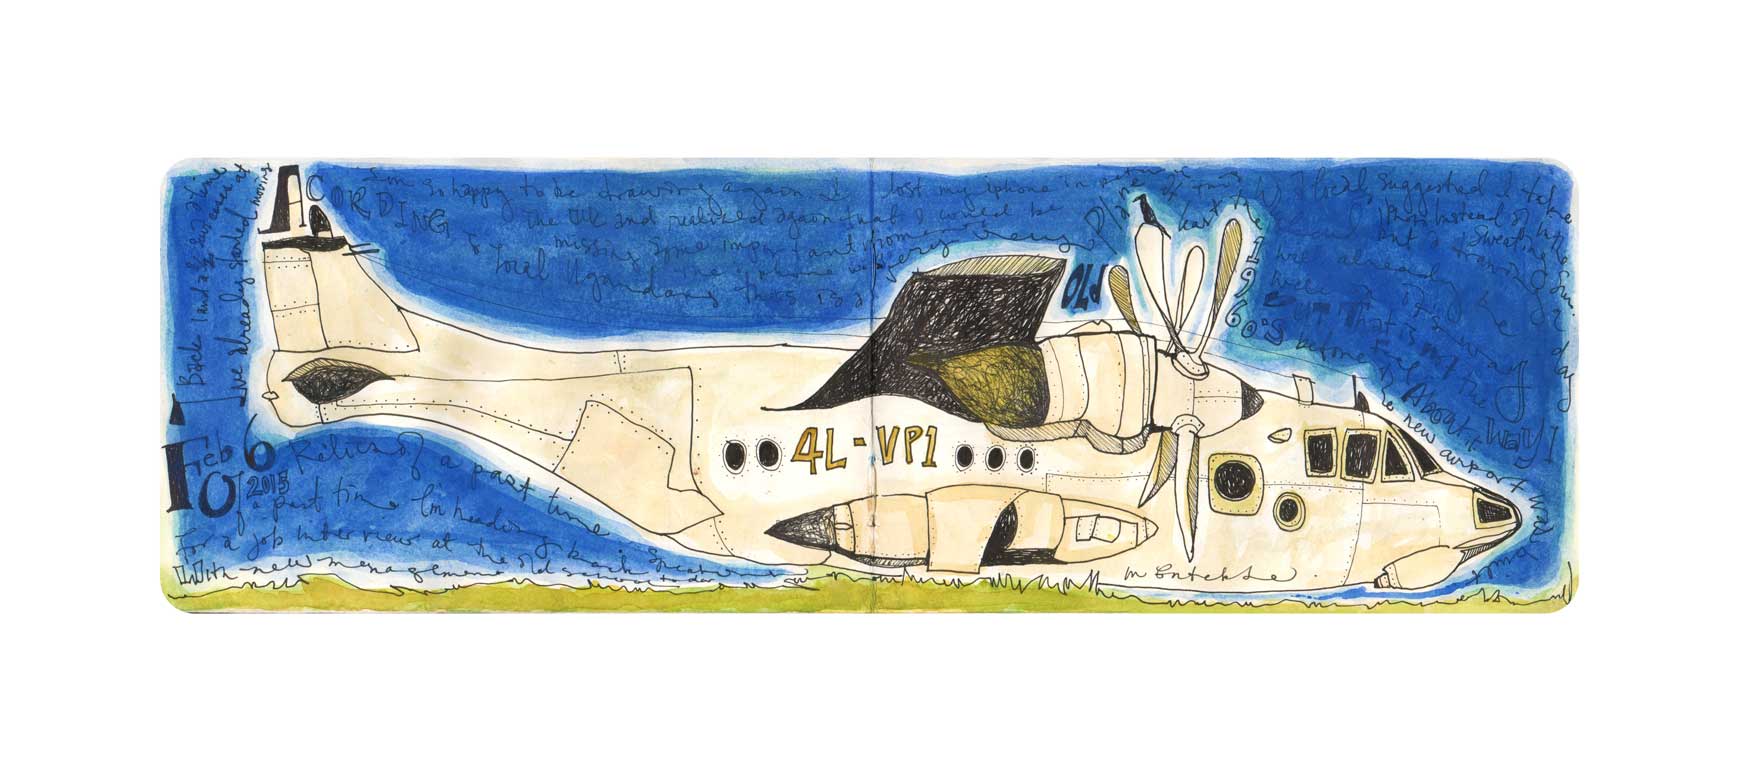 art print old airplane on grass with blue sky archival limited edition of 40 ink and watercolor wall art with embossed logo